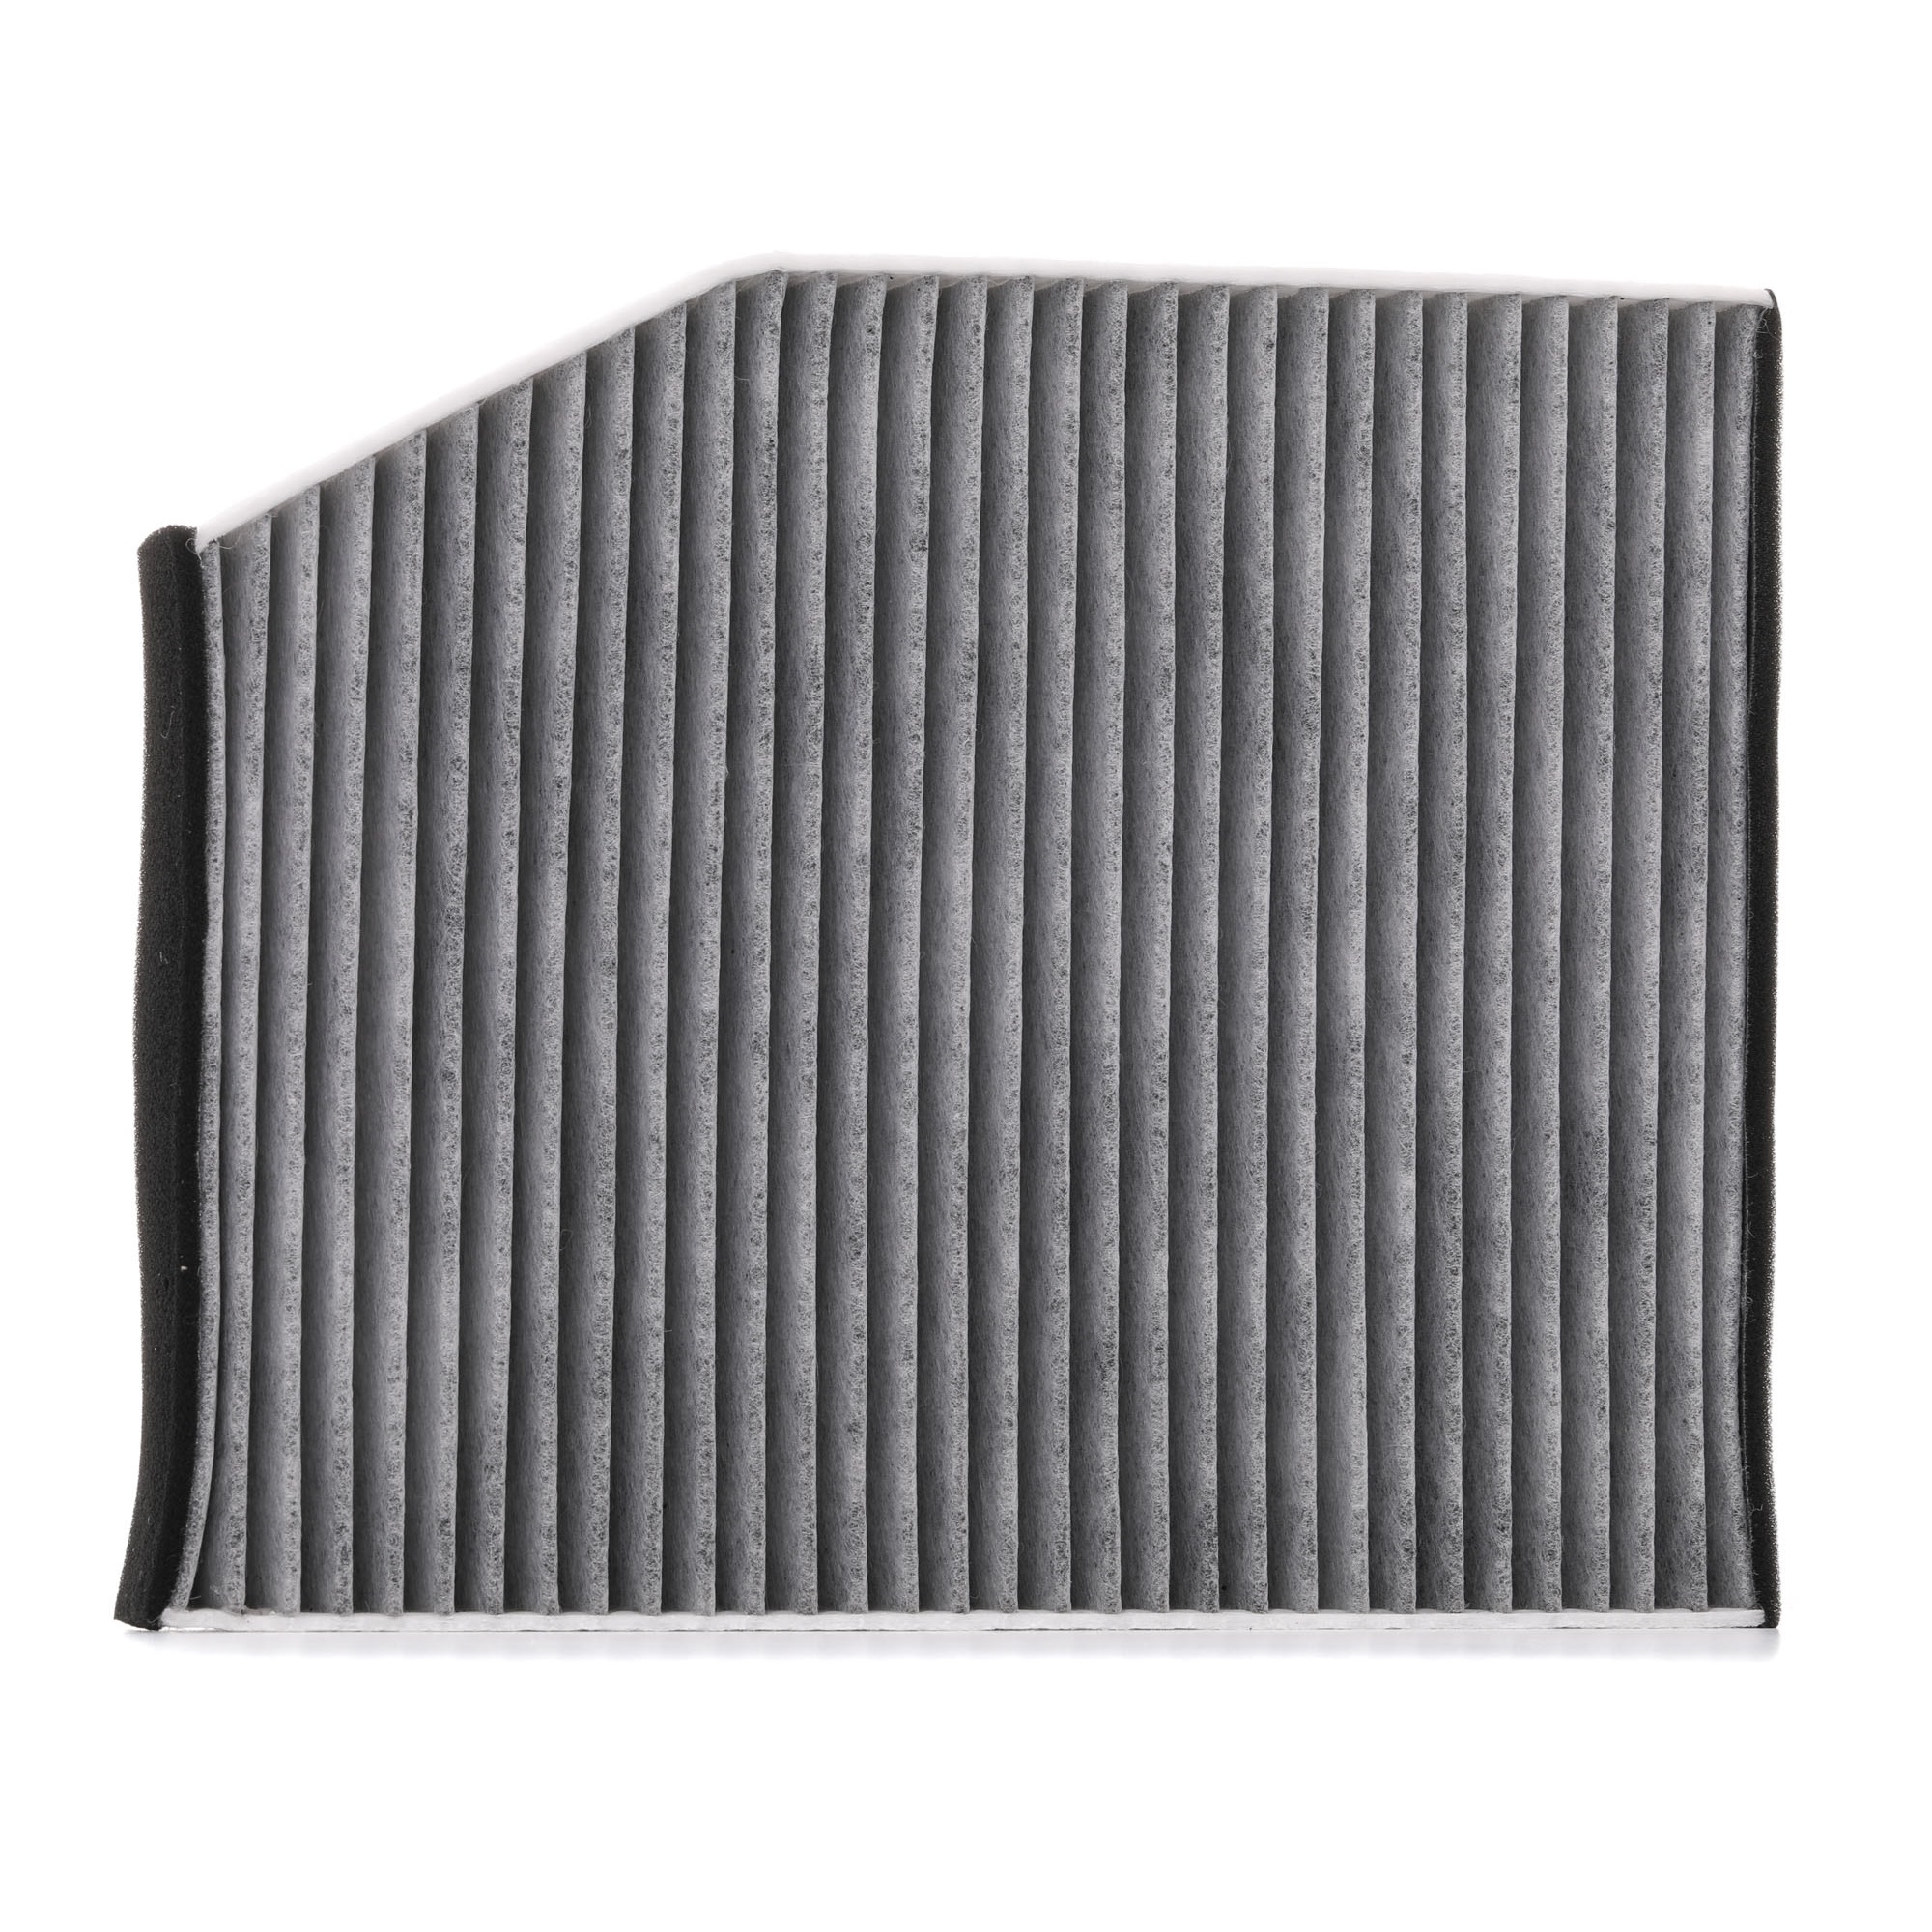 STARK Activated Carbon Filter, 284 mm x 232 mm x 30 mm Width: 232mm, Height: 30mm, Length: 284mm Cabin filter SKIF-0170427 buy